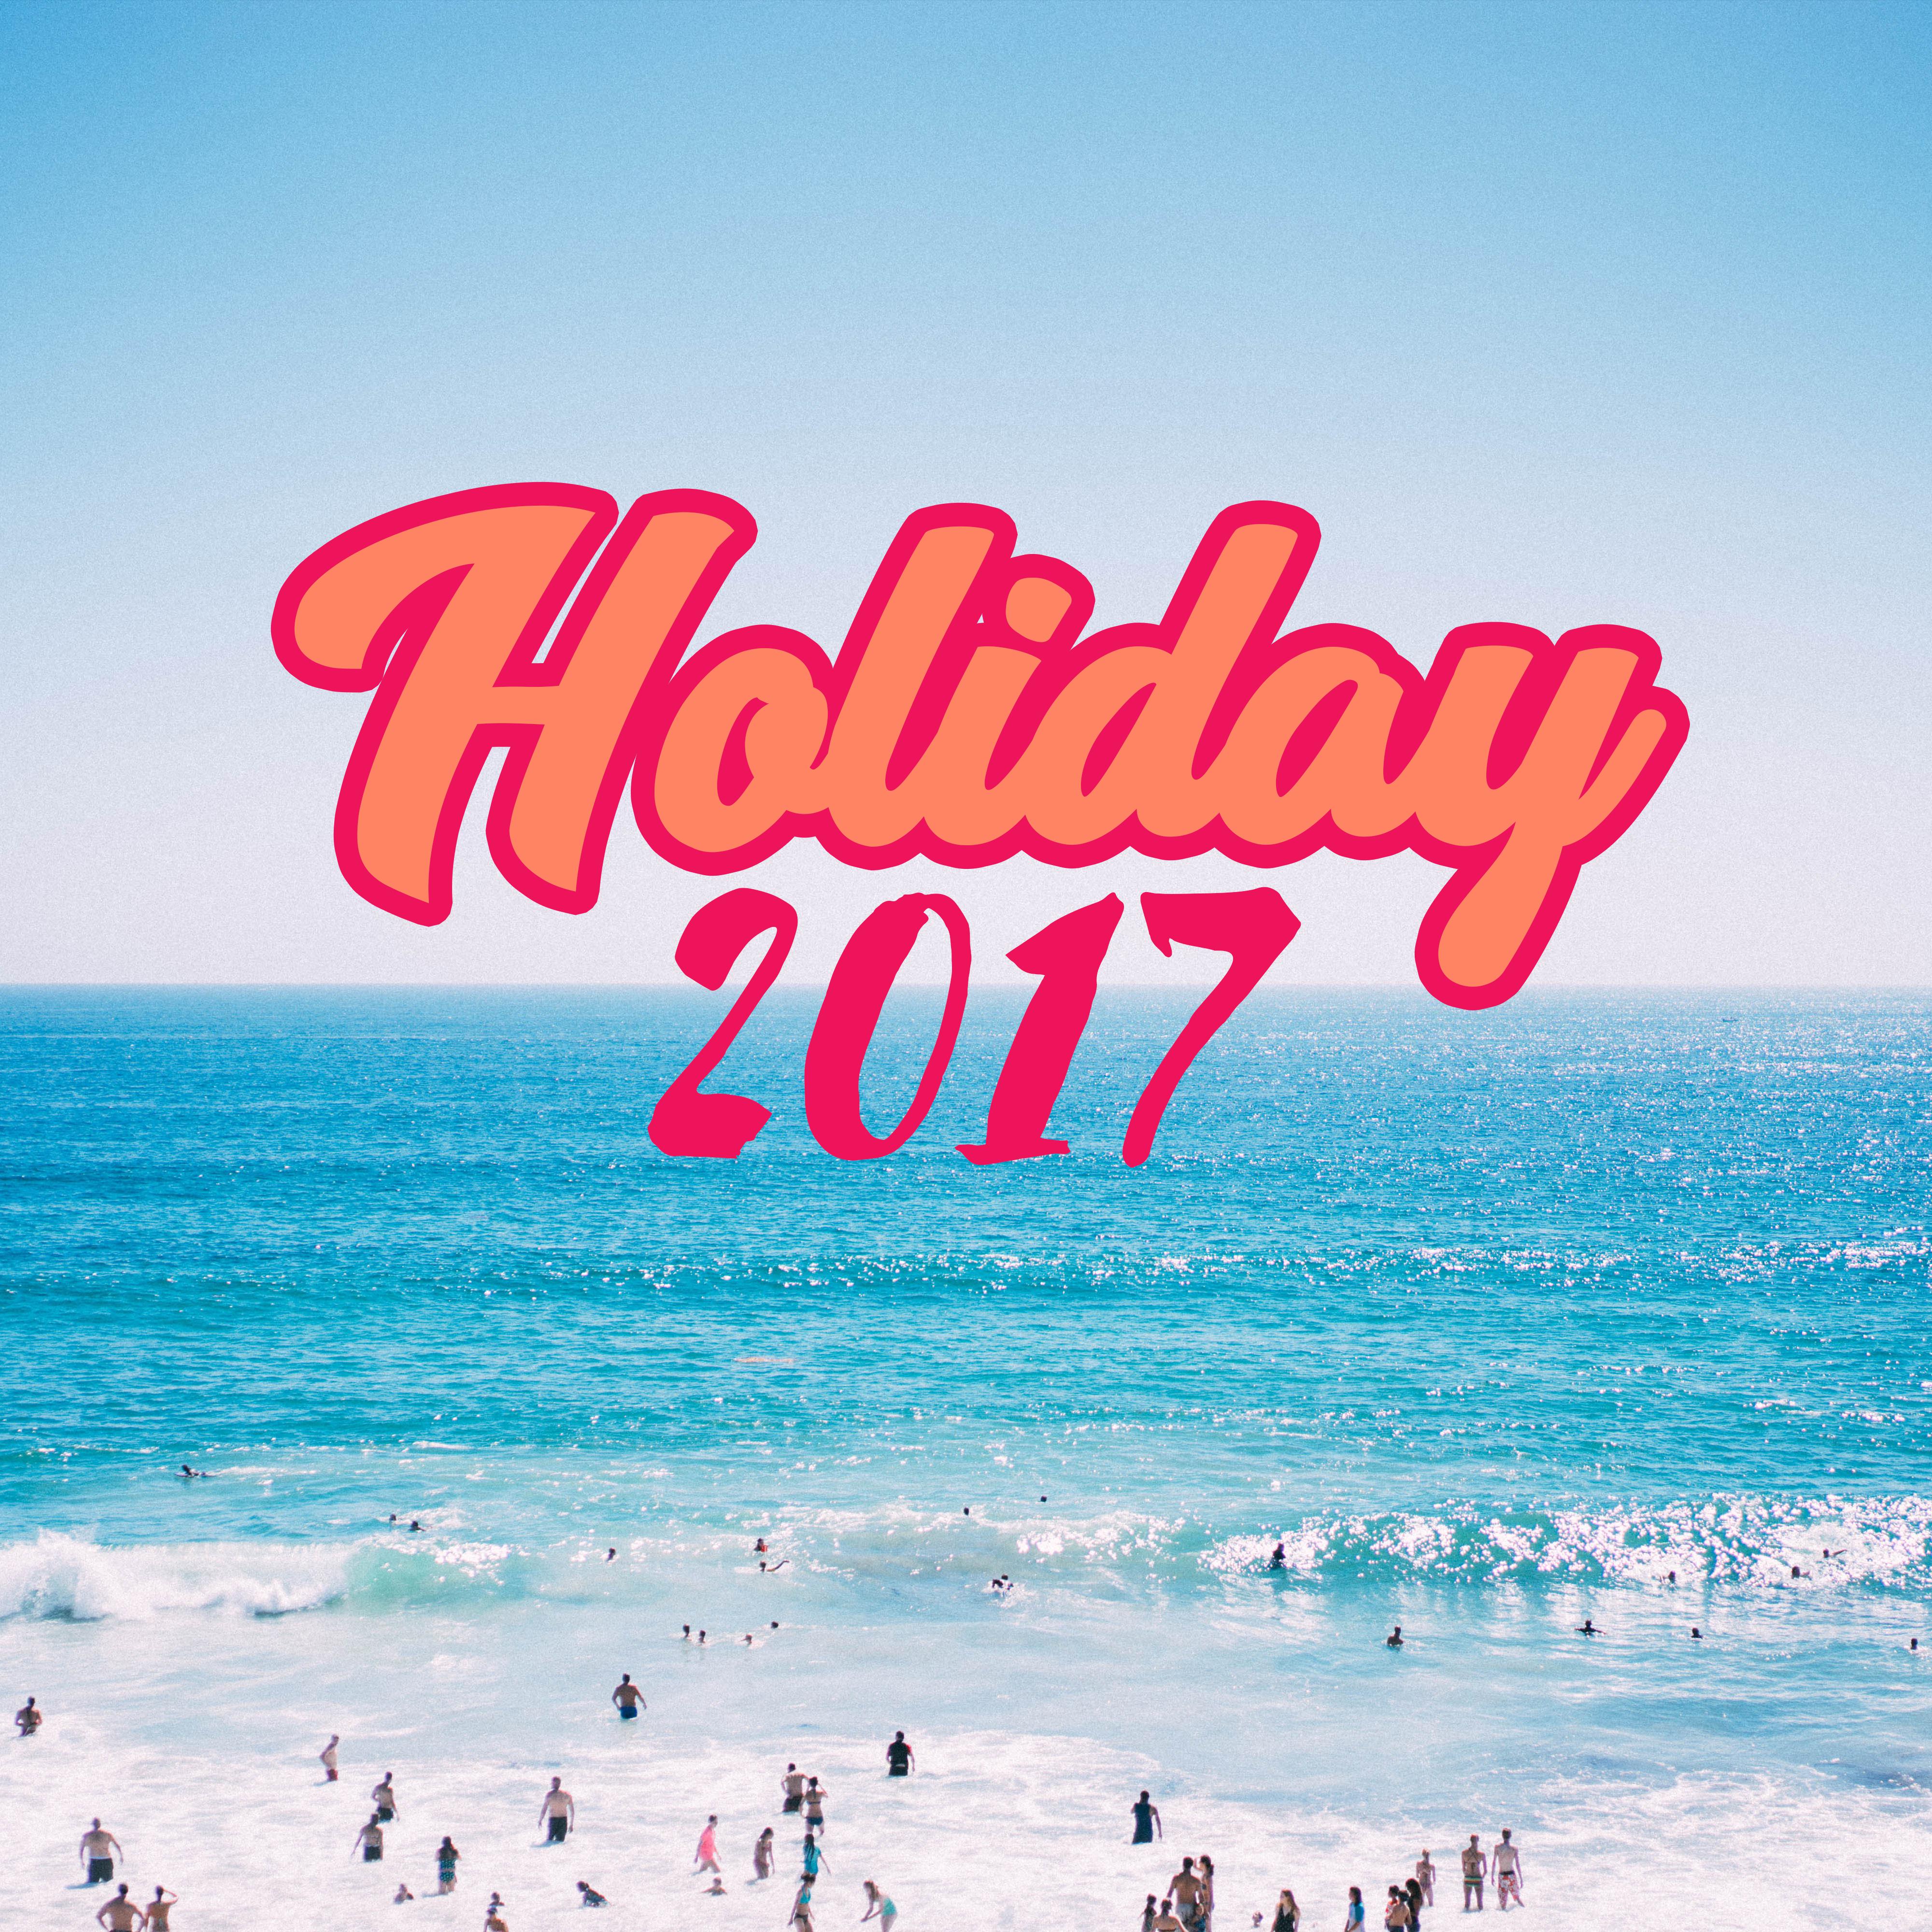 Holiday 2017 – Disco Beach, Hot Party Ibiza, Summer Hits, Chill Out 2017, *** Music